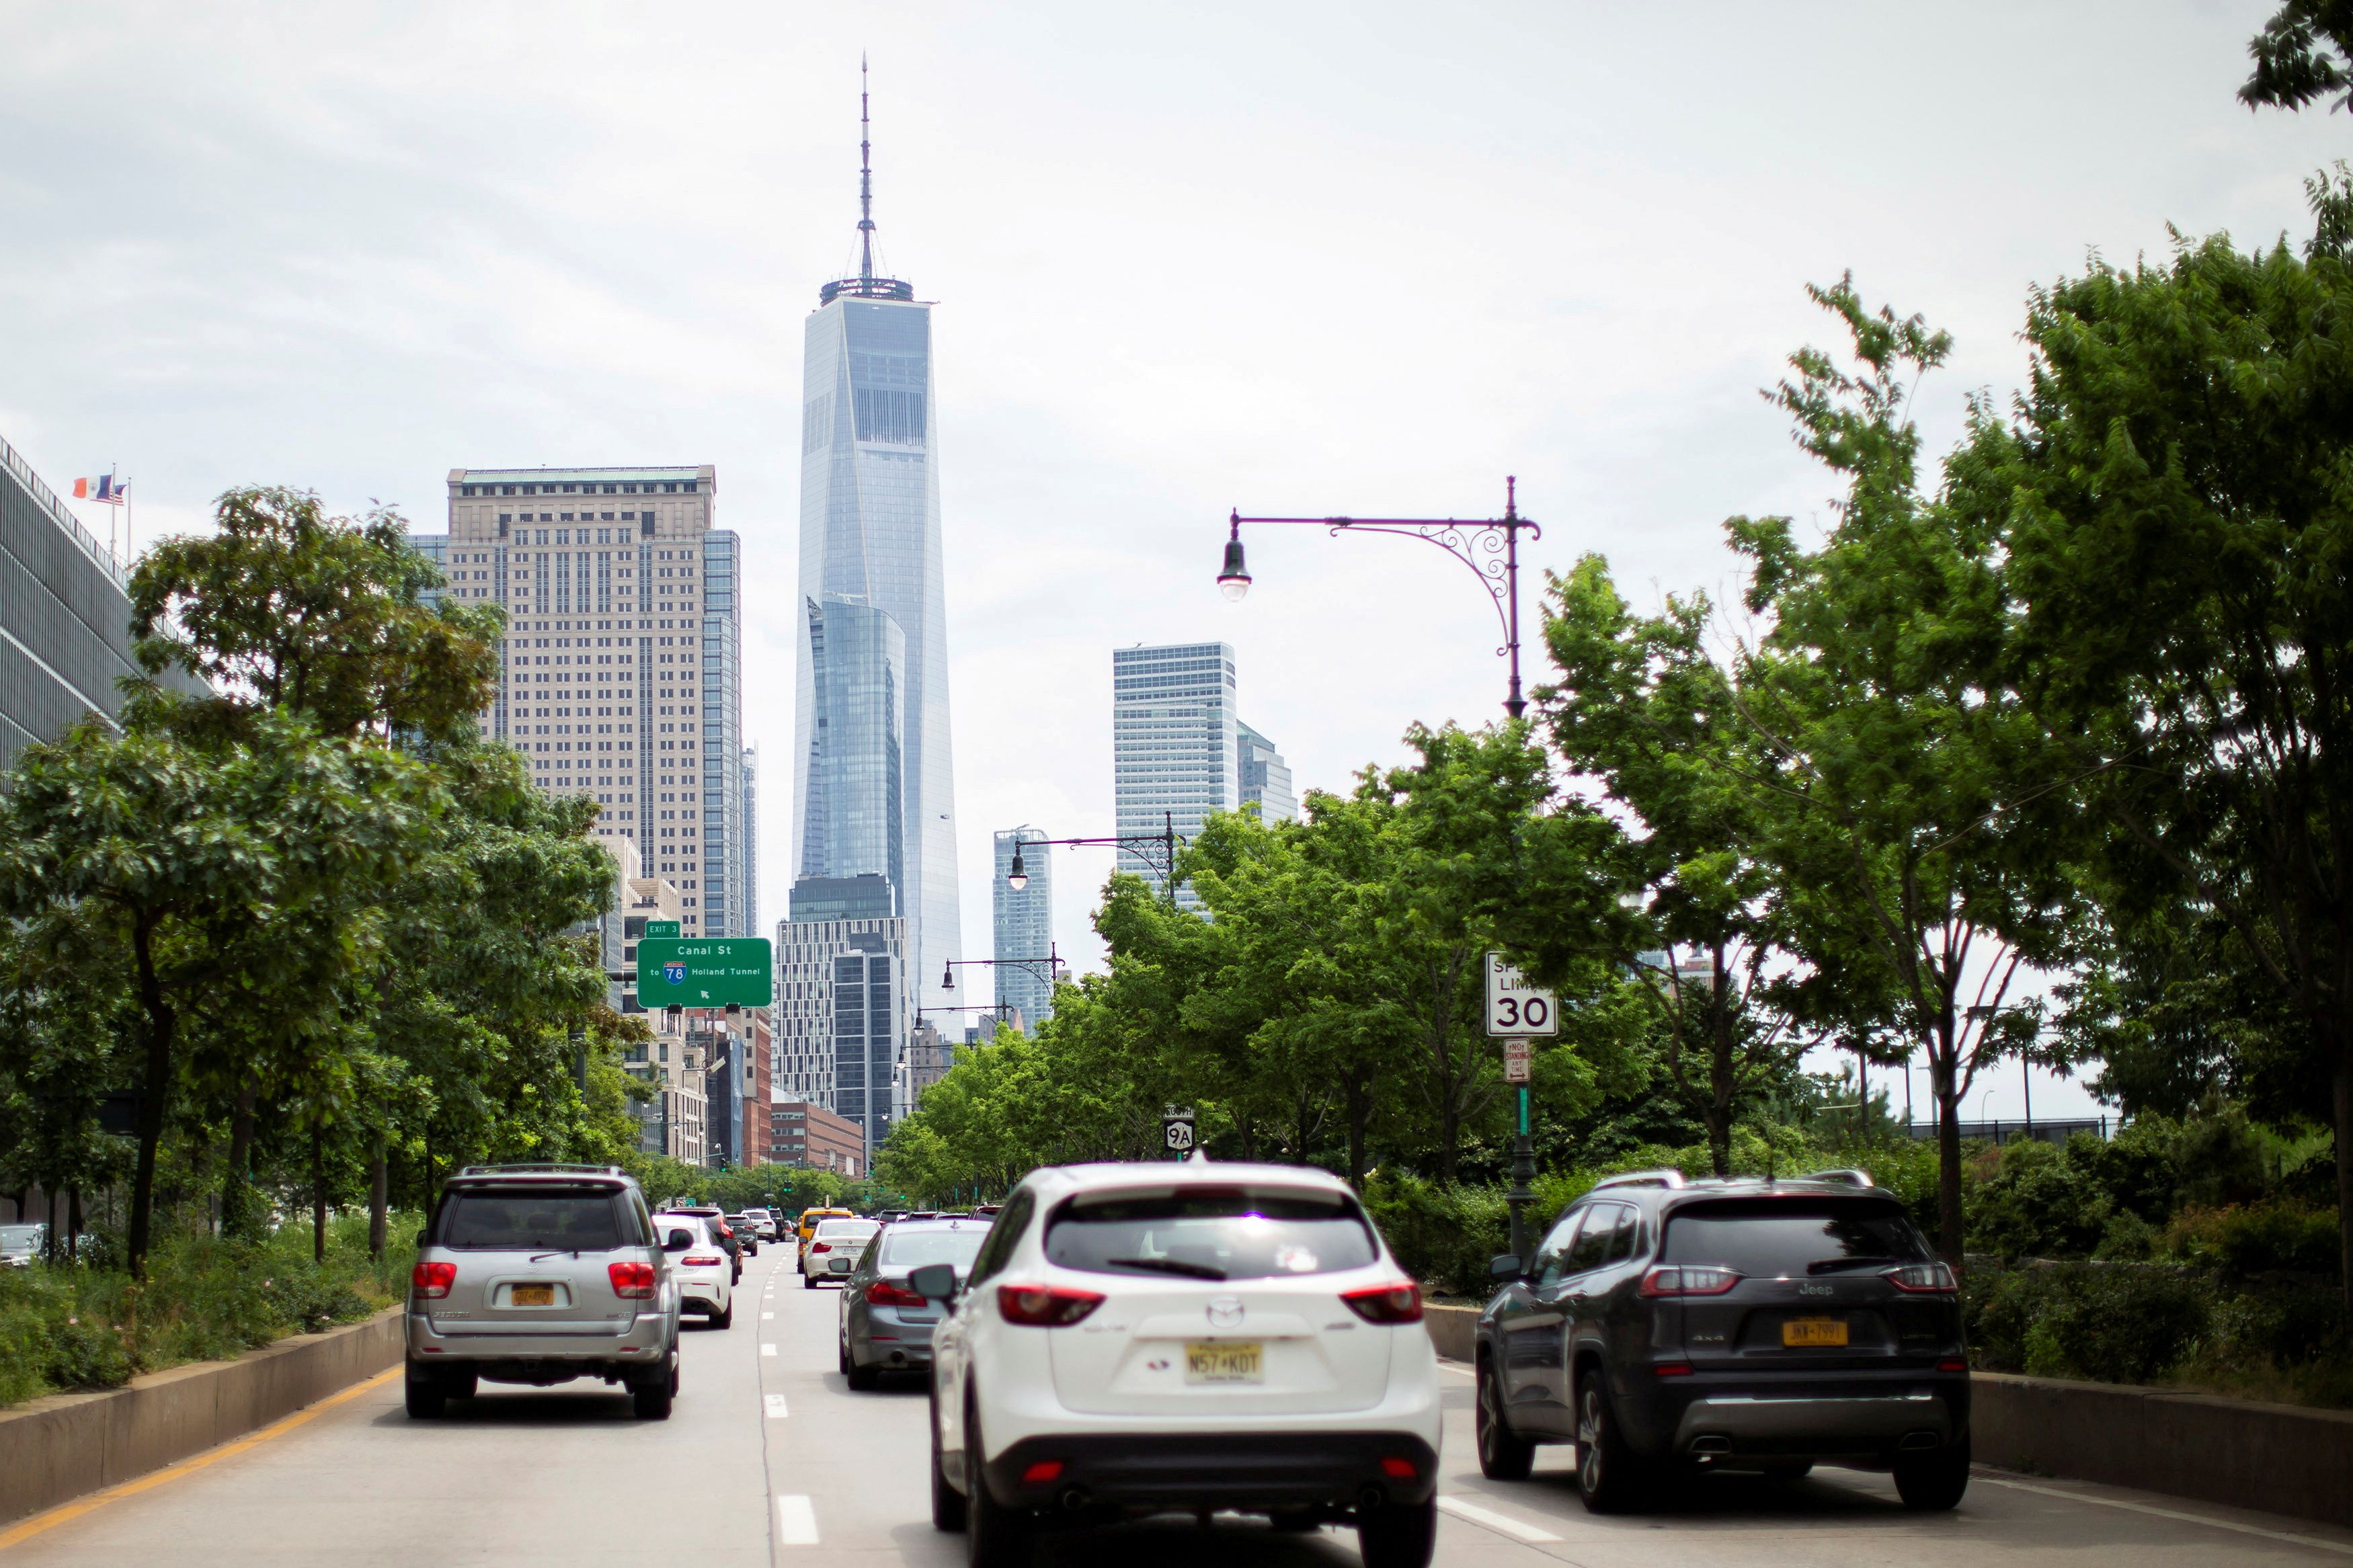 Traffic is seen at West Street ahead of the July 4th holiday, in New York City